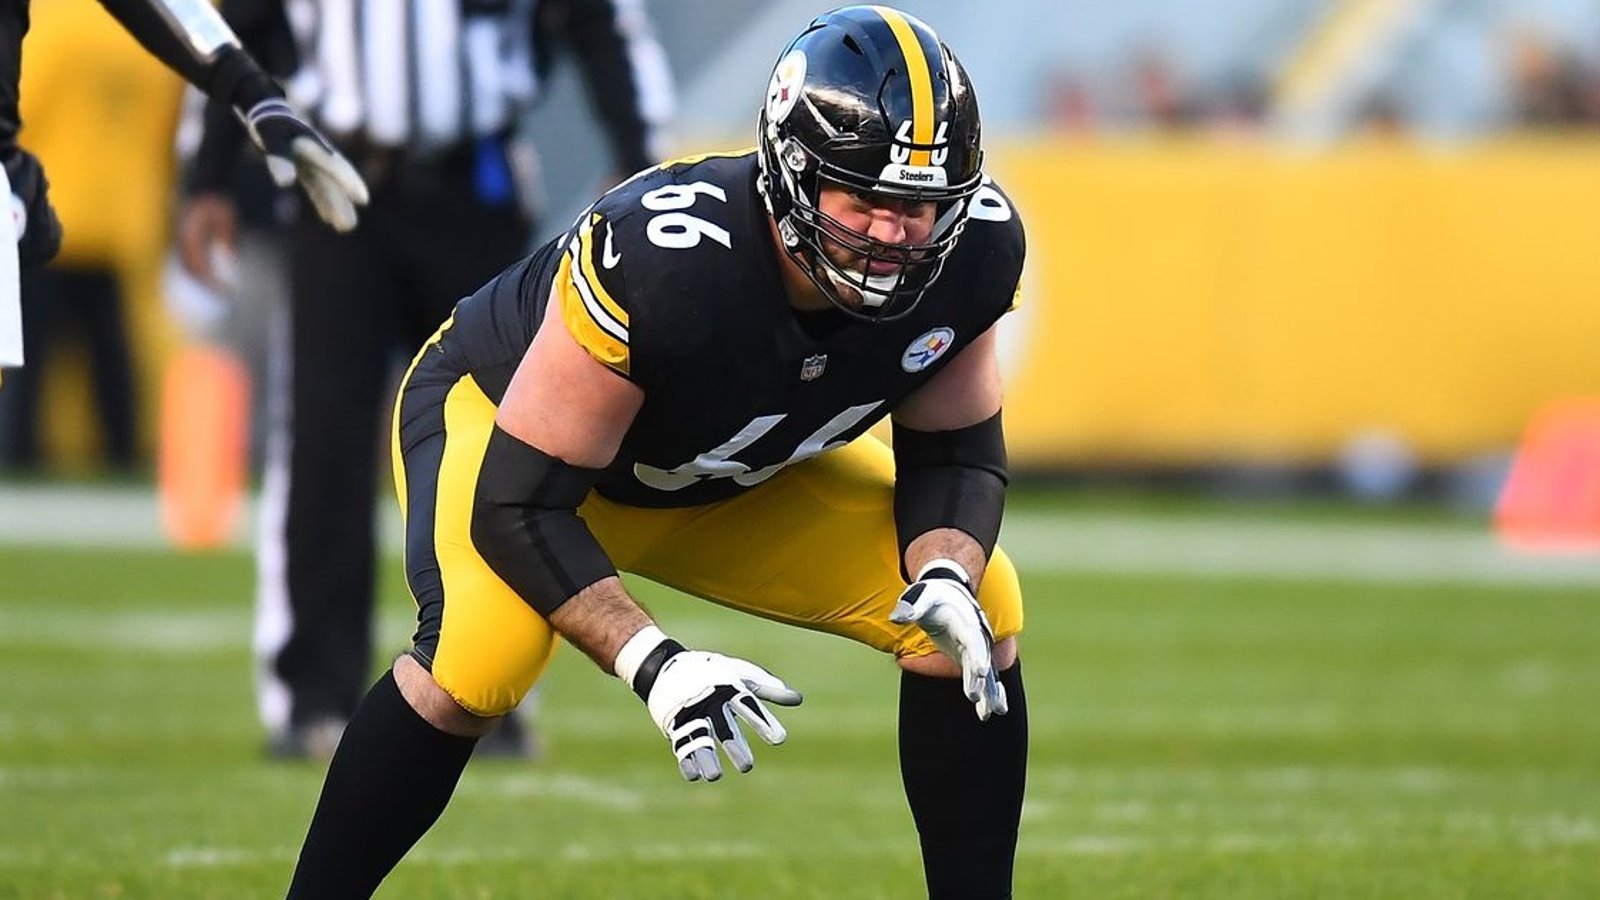 Steelers will be without David DeCastro for Week 1.